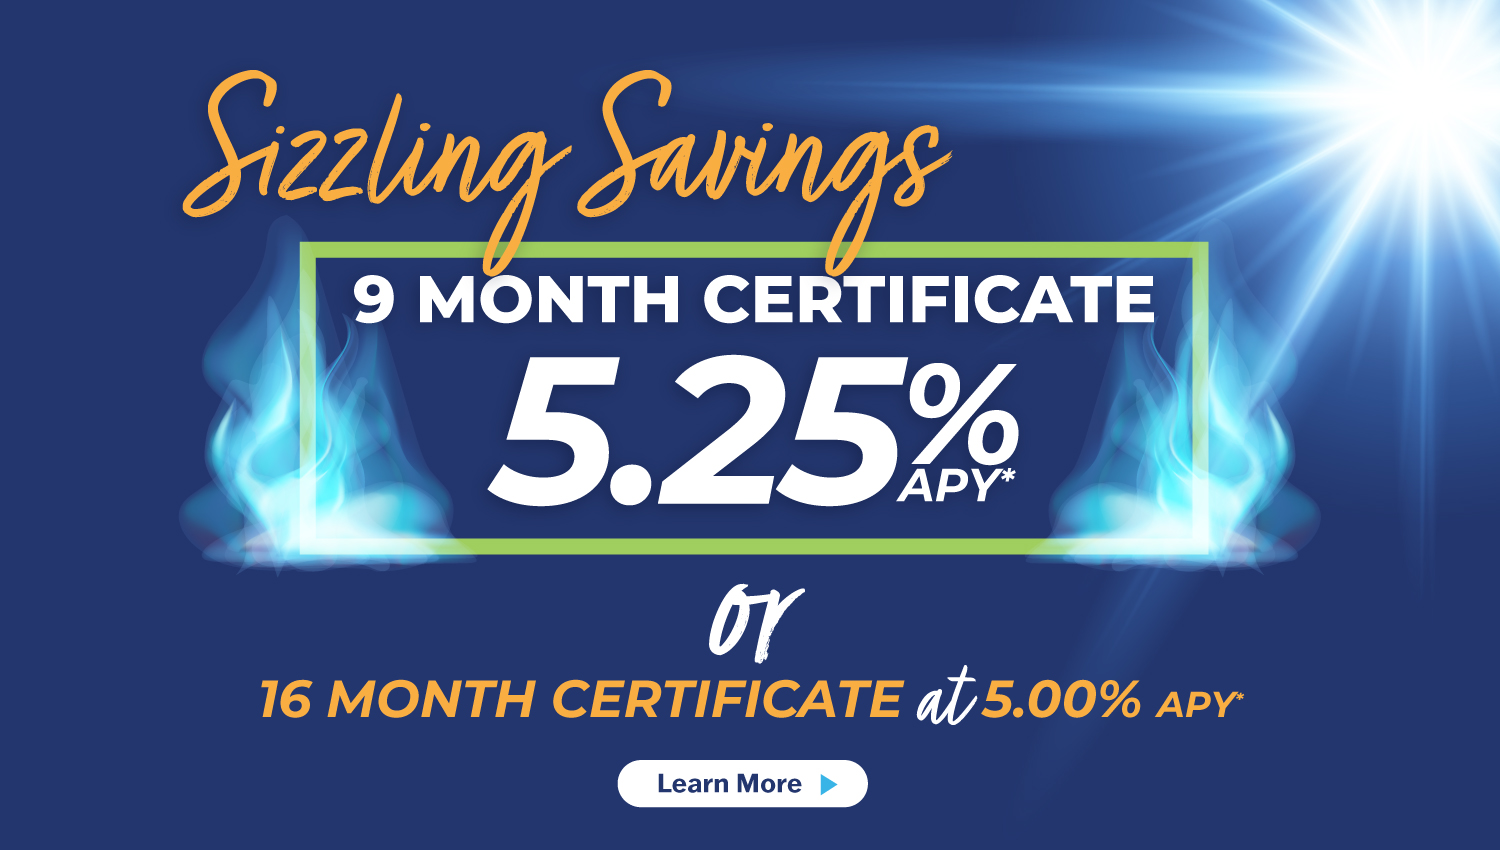 Sizzling Savings with Certificates!